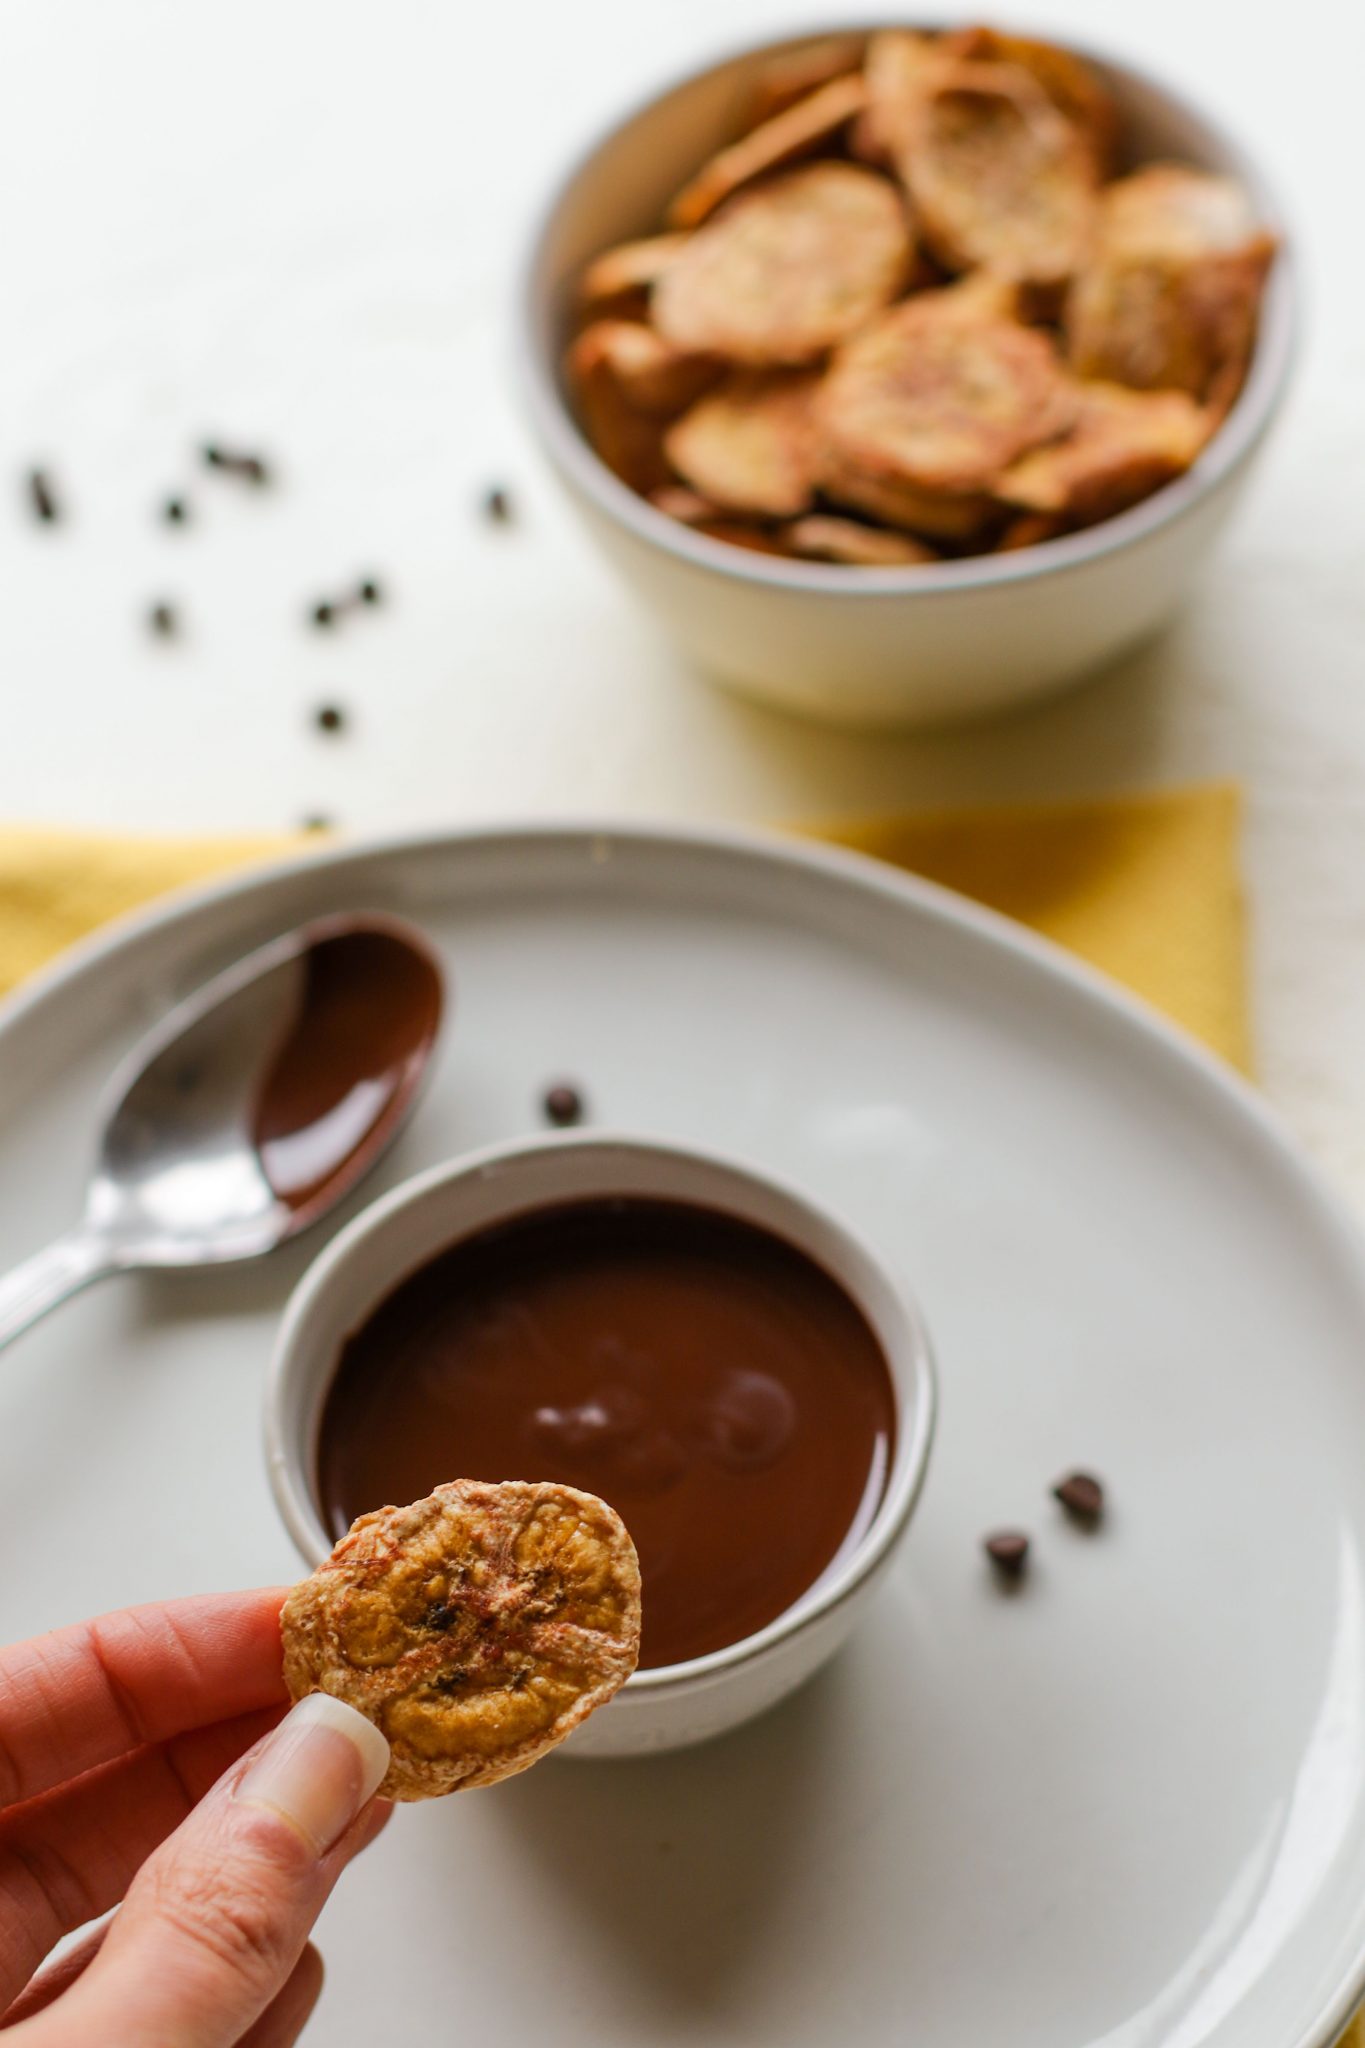 Banana Chips dipped in melted chocolate